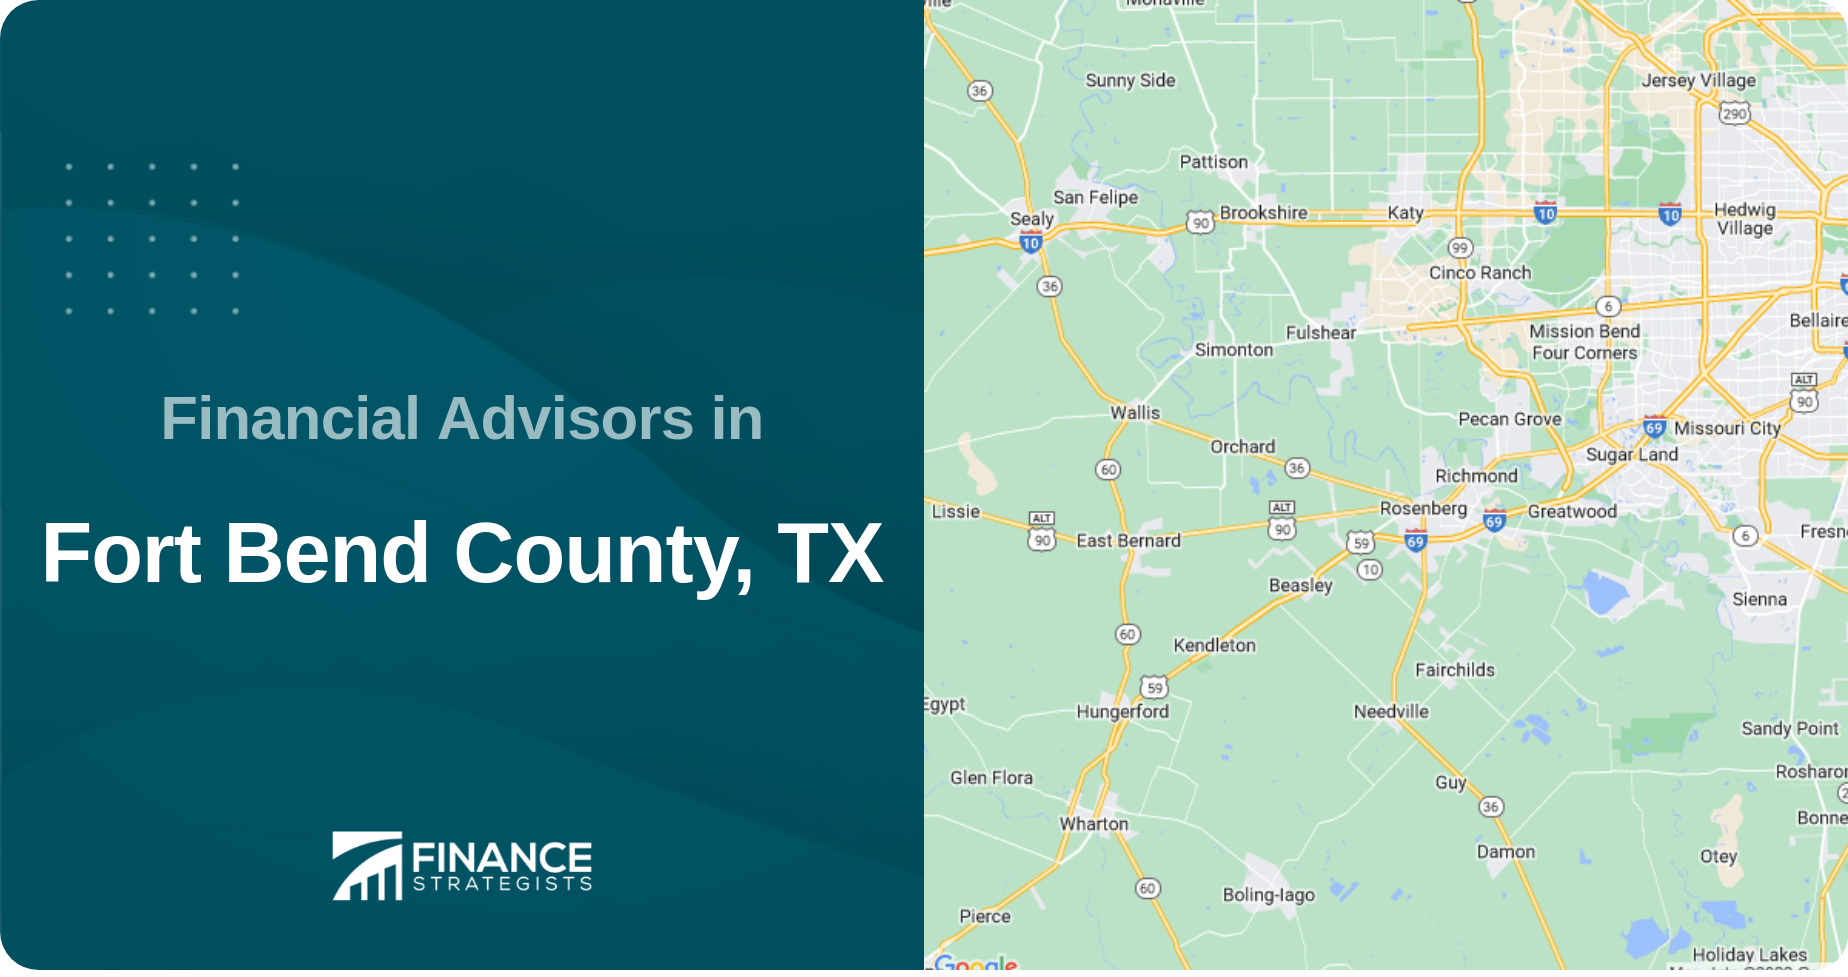 Financial Advisors in Fort Bend County, TX